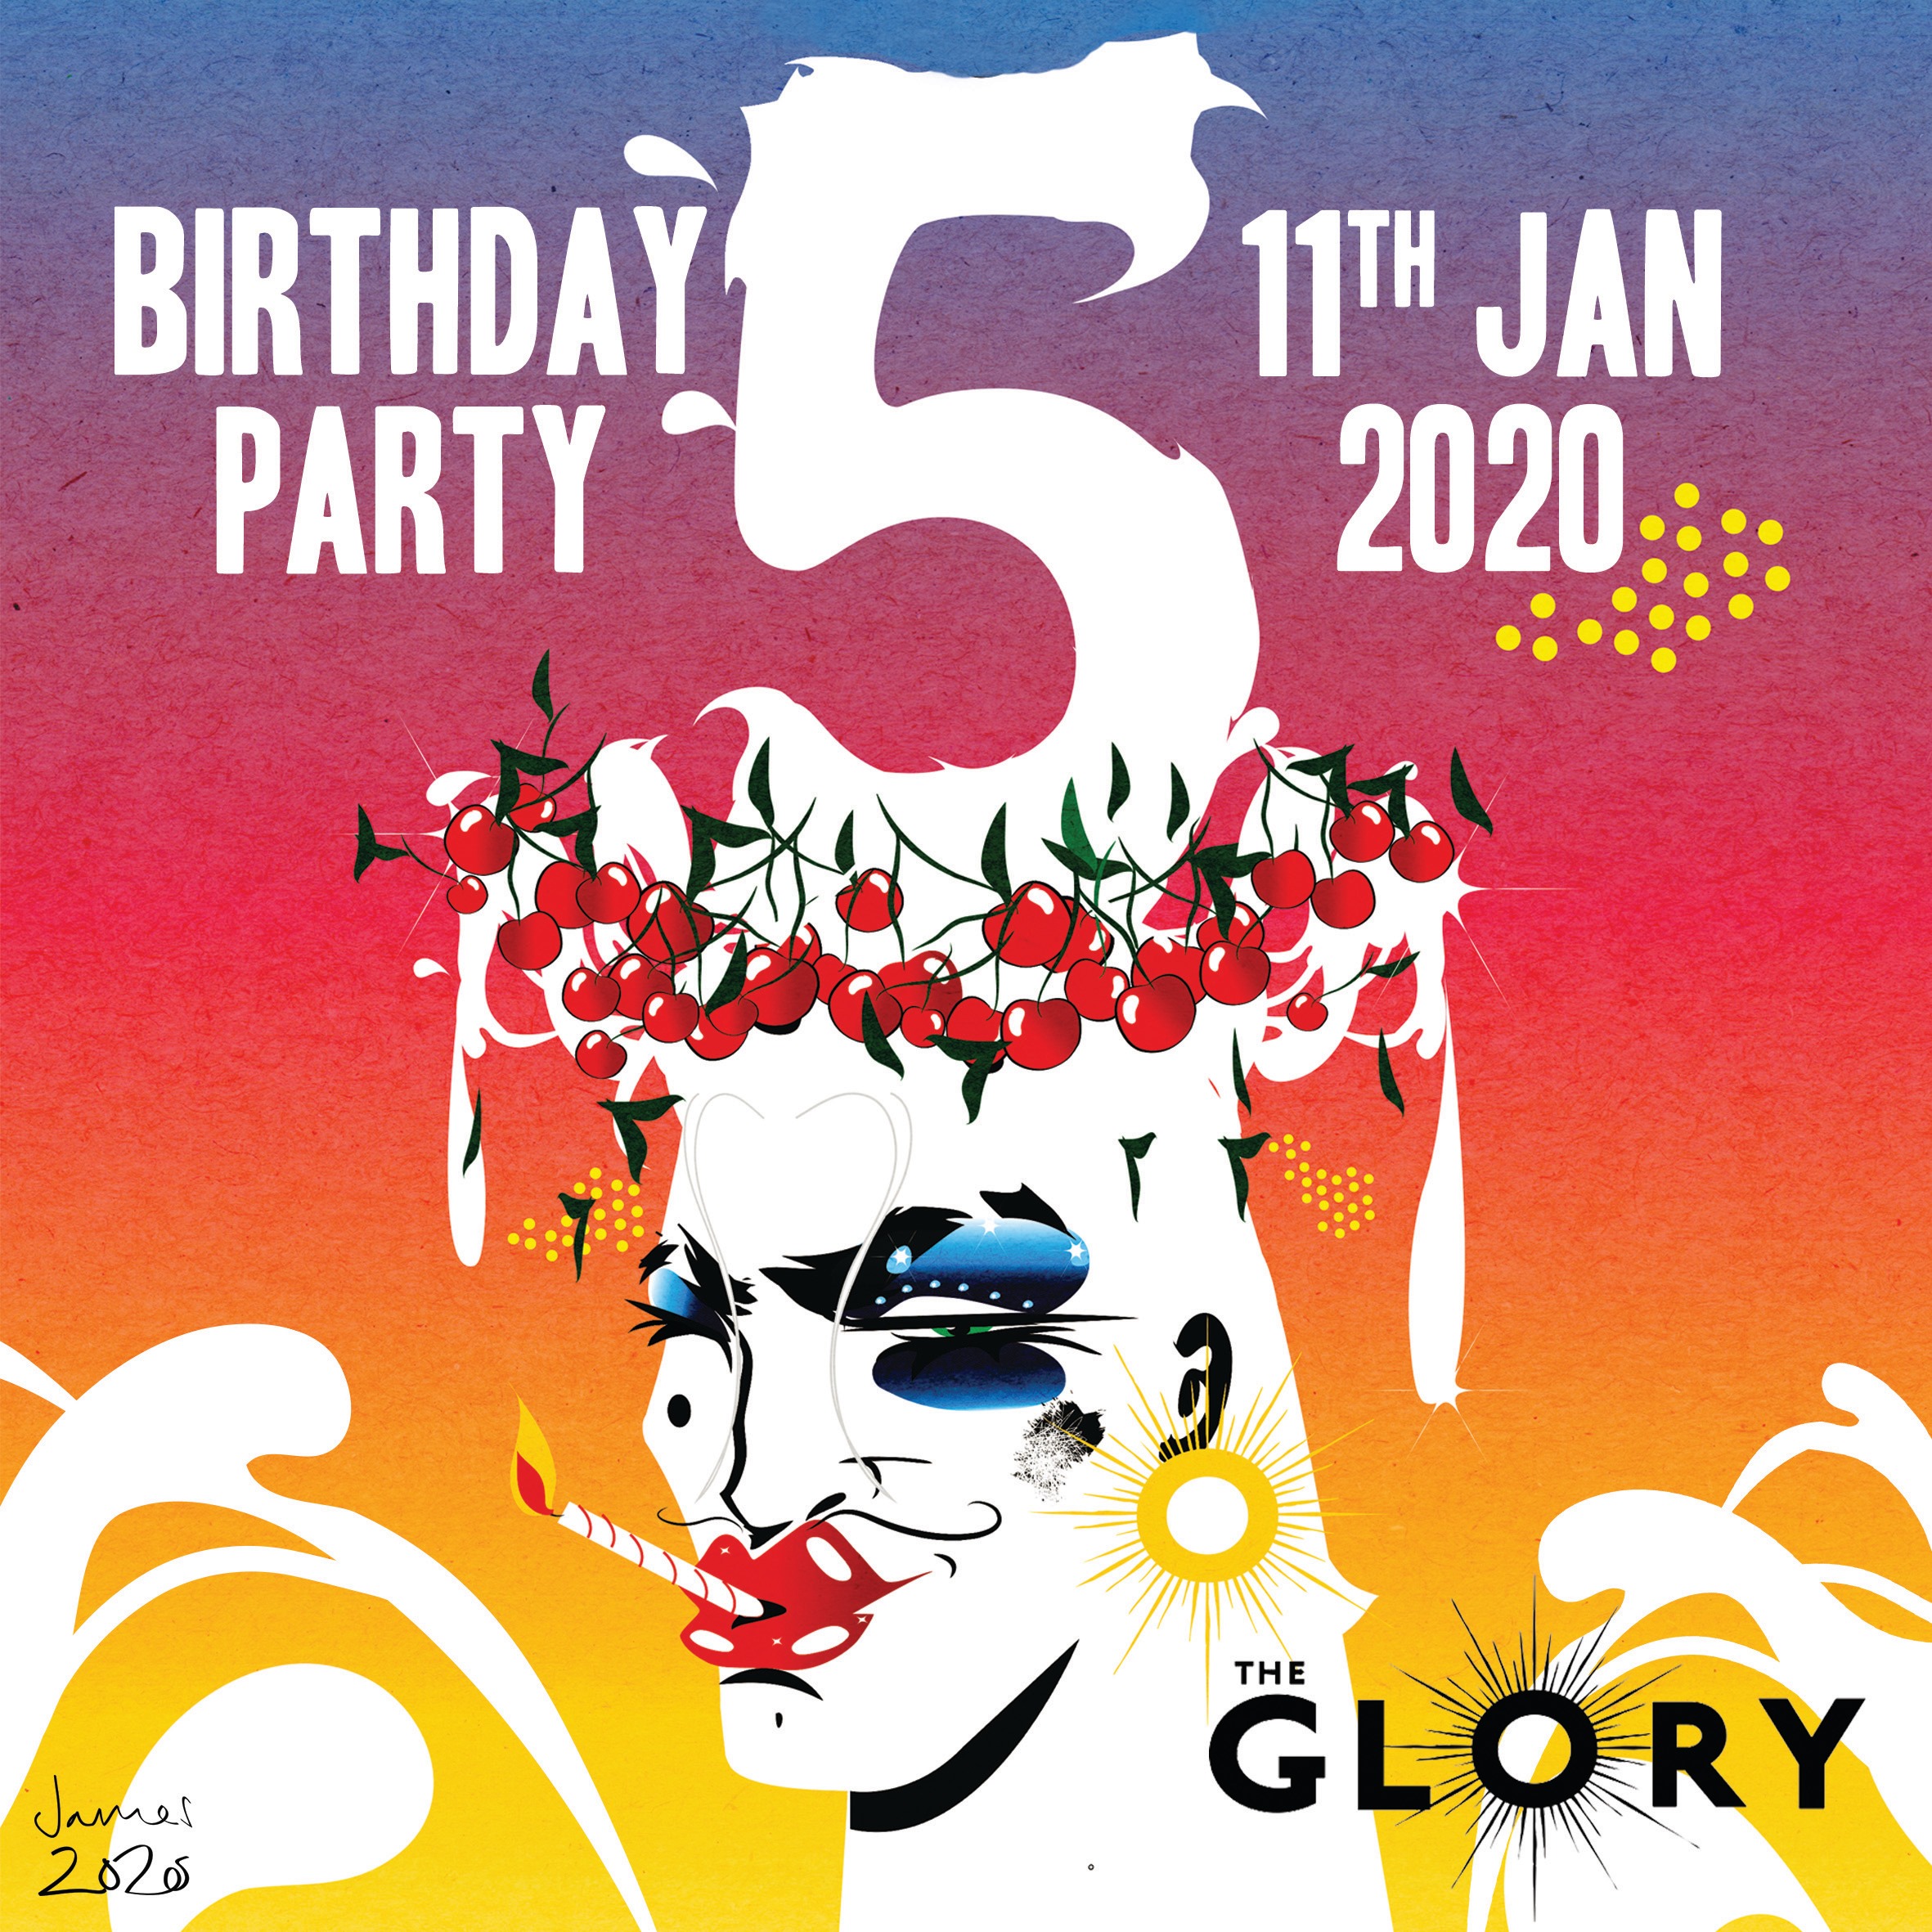 Snaps from The Glory’s 5th Birthday!